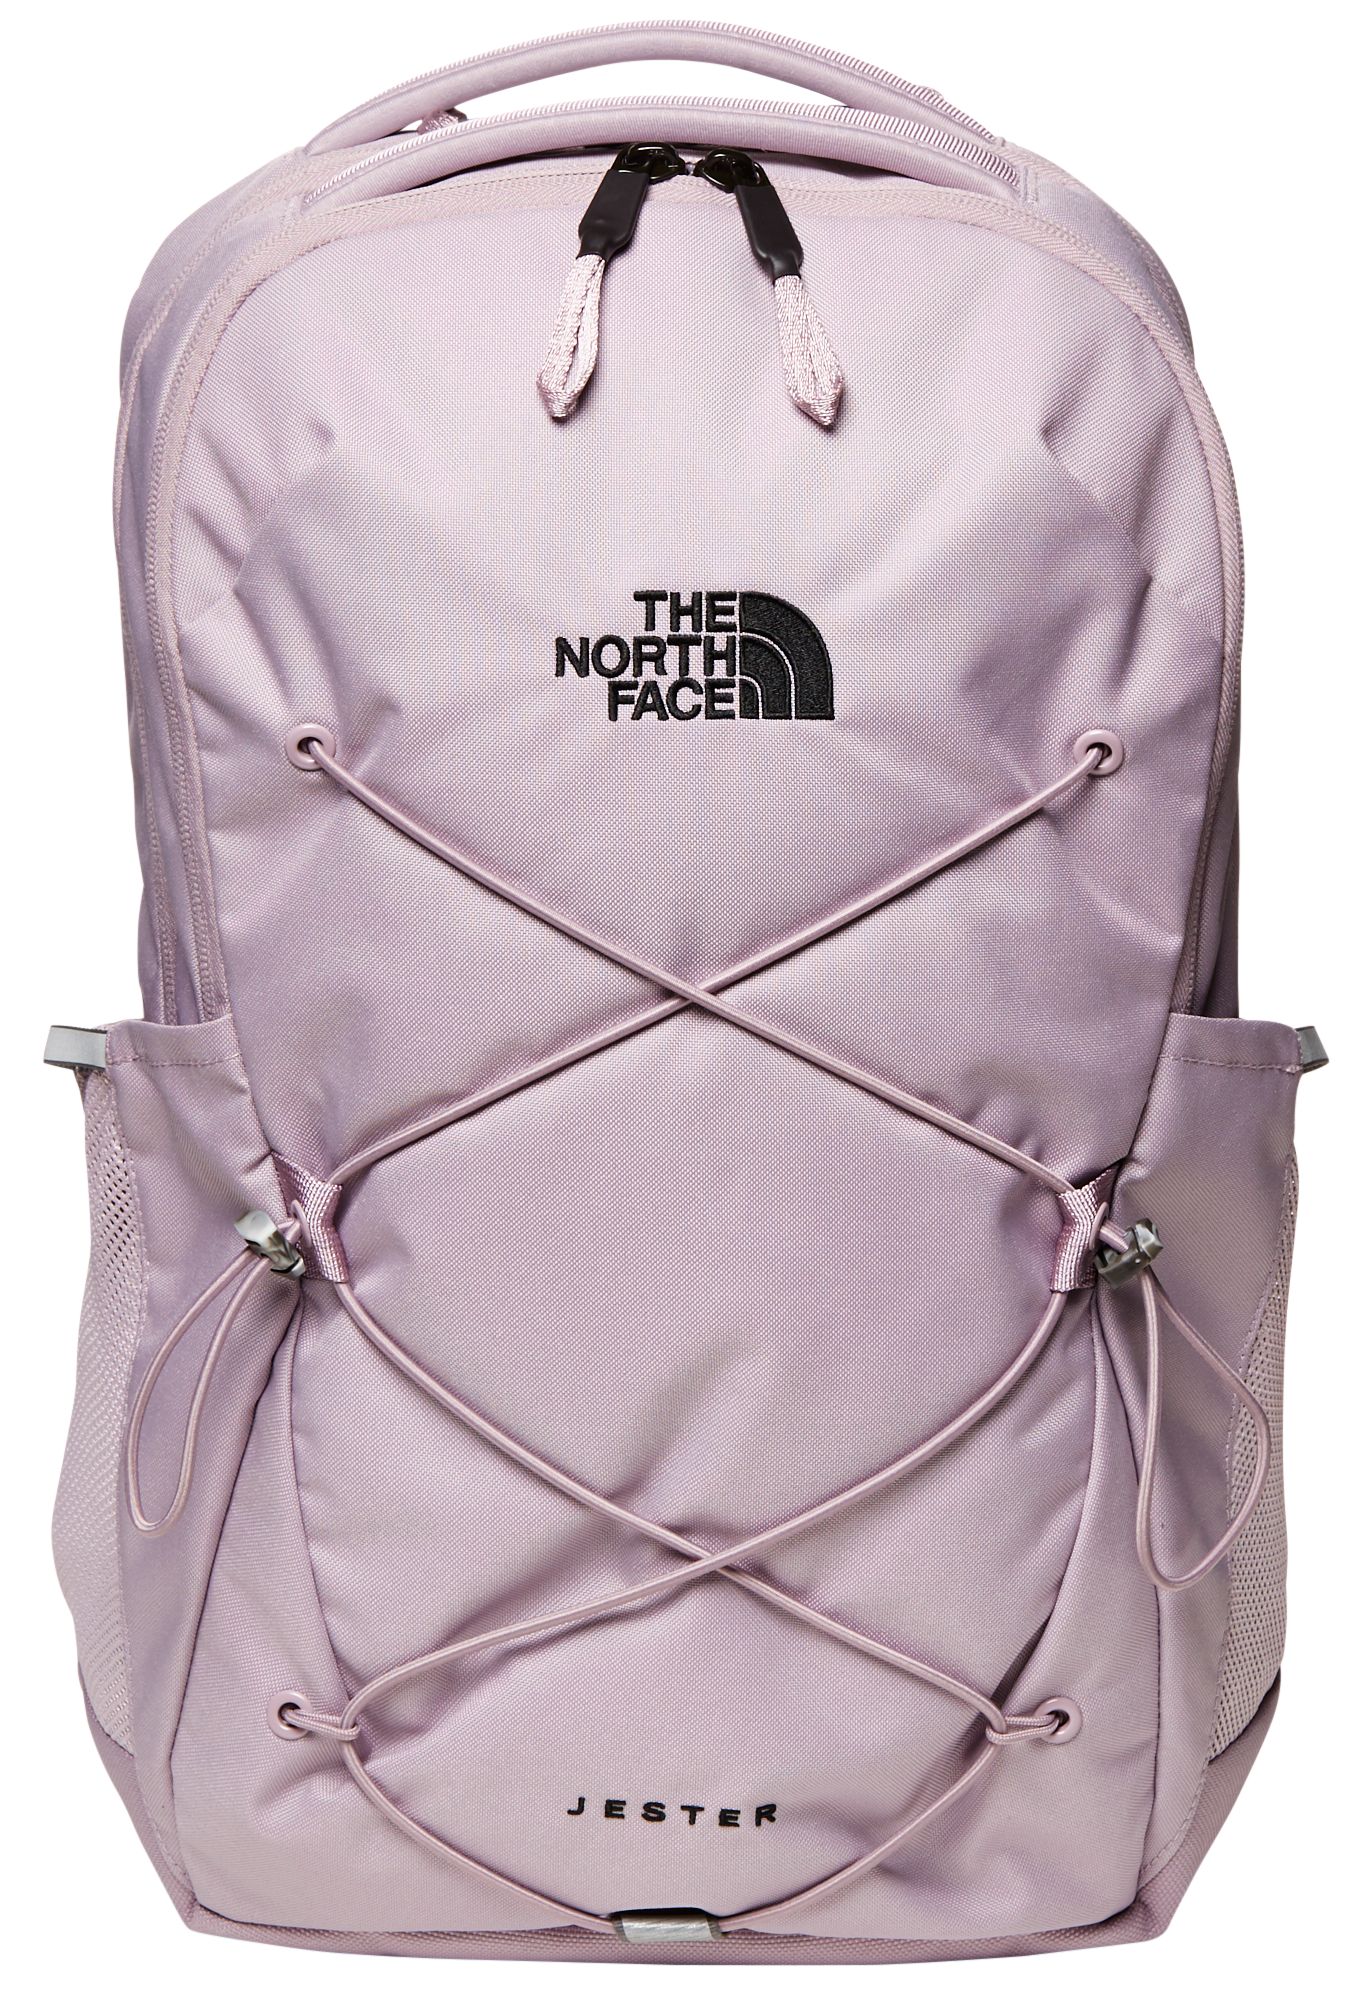 north face backpack black and pink